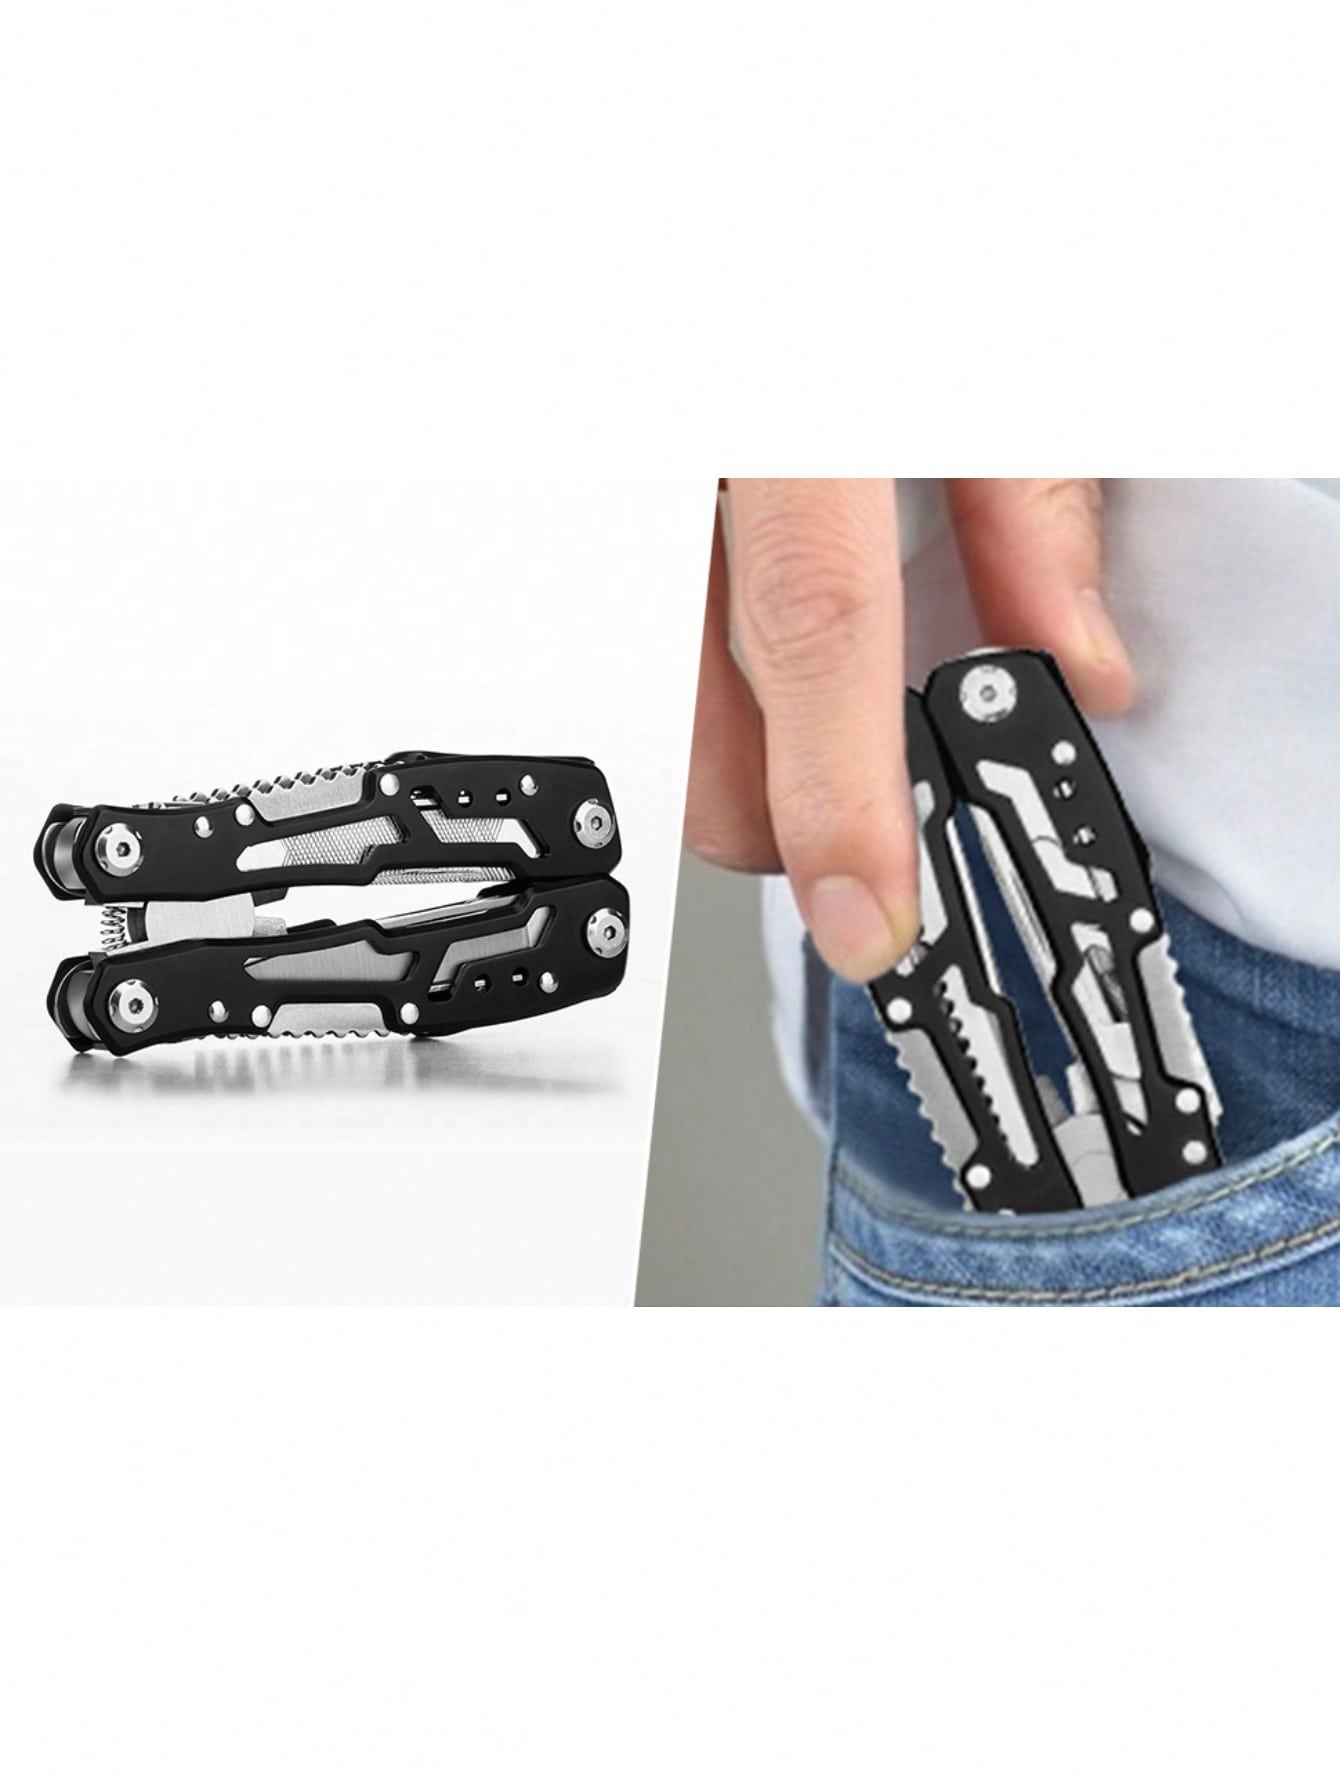 Stainless Steel 14-In-1 Portable Multi-Functional Pliers Combination Tool (Different Sizes) 💜